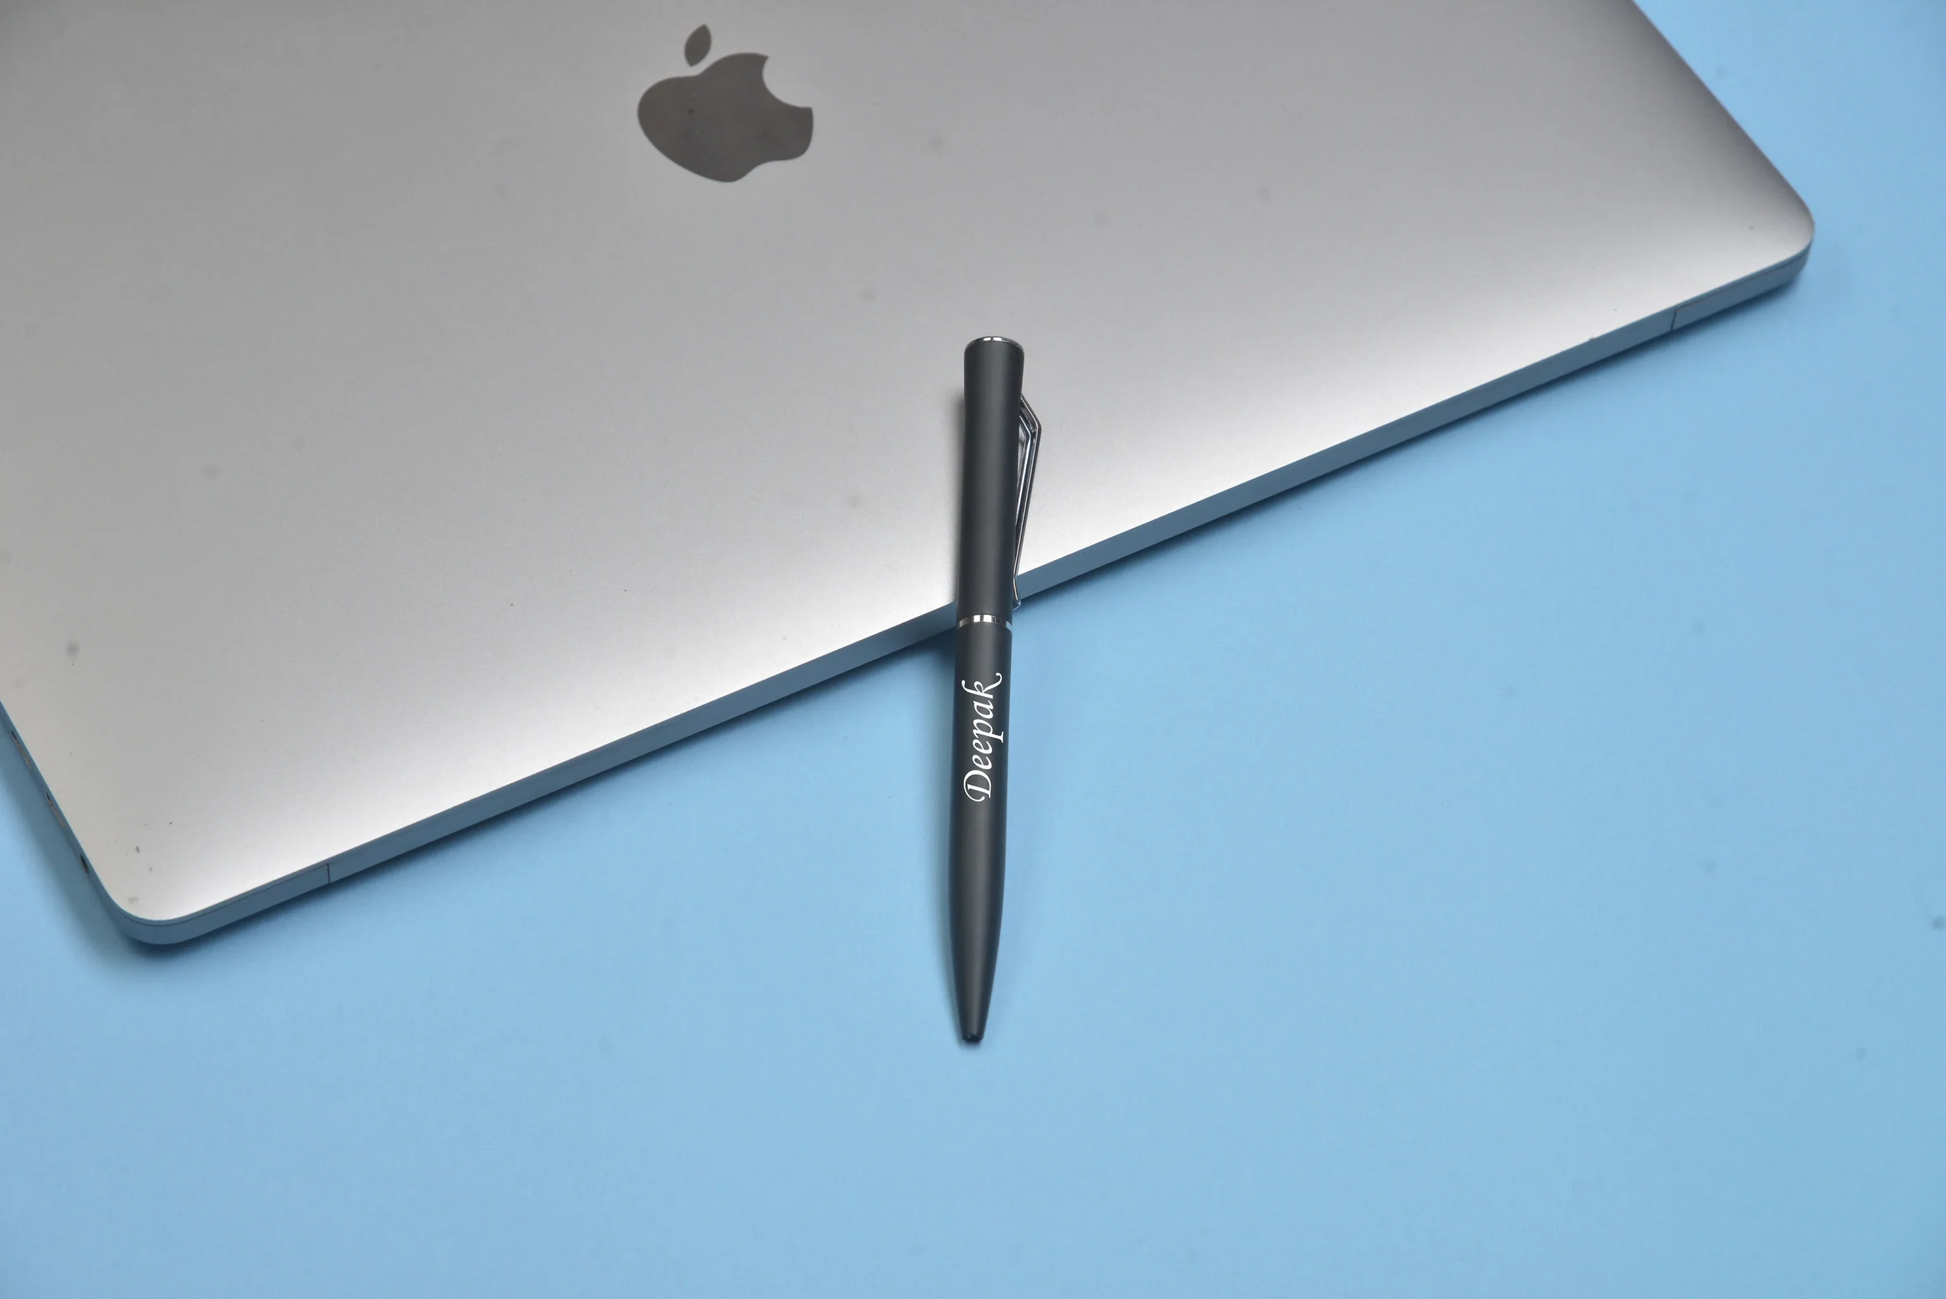 This classic metal pen is the perfect combination of style and functionality.